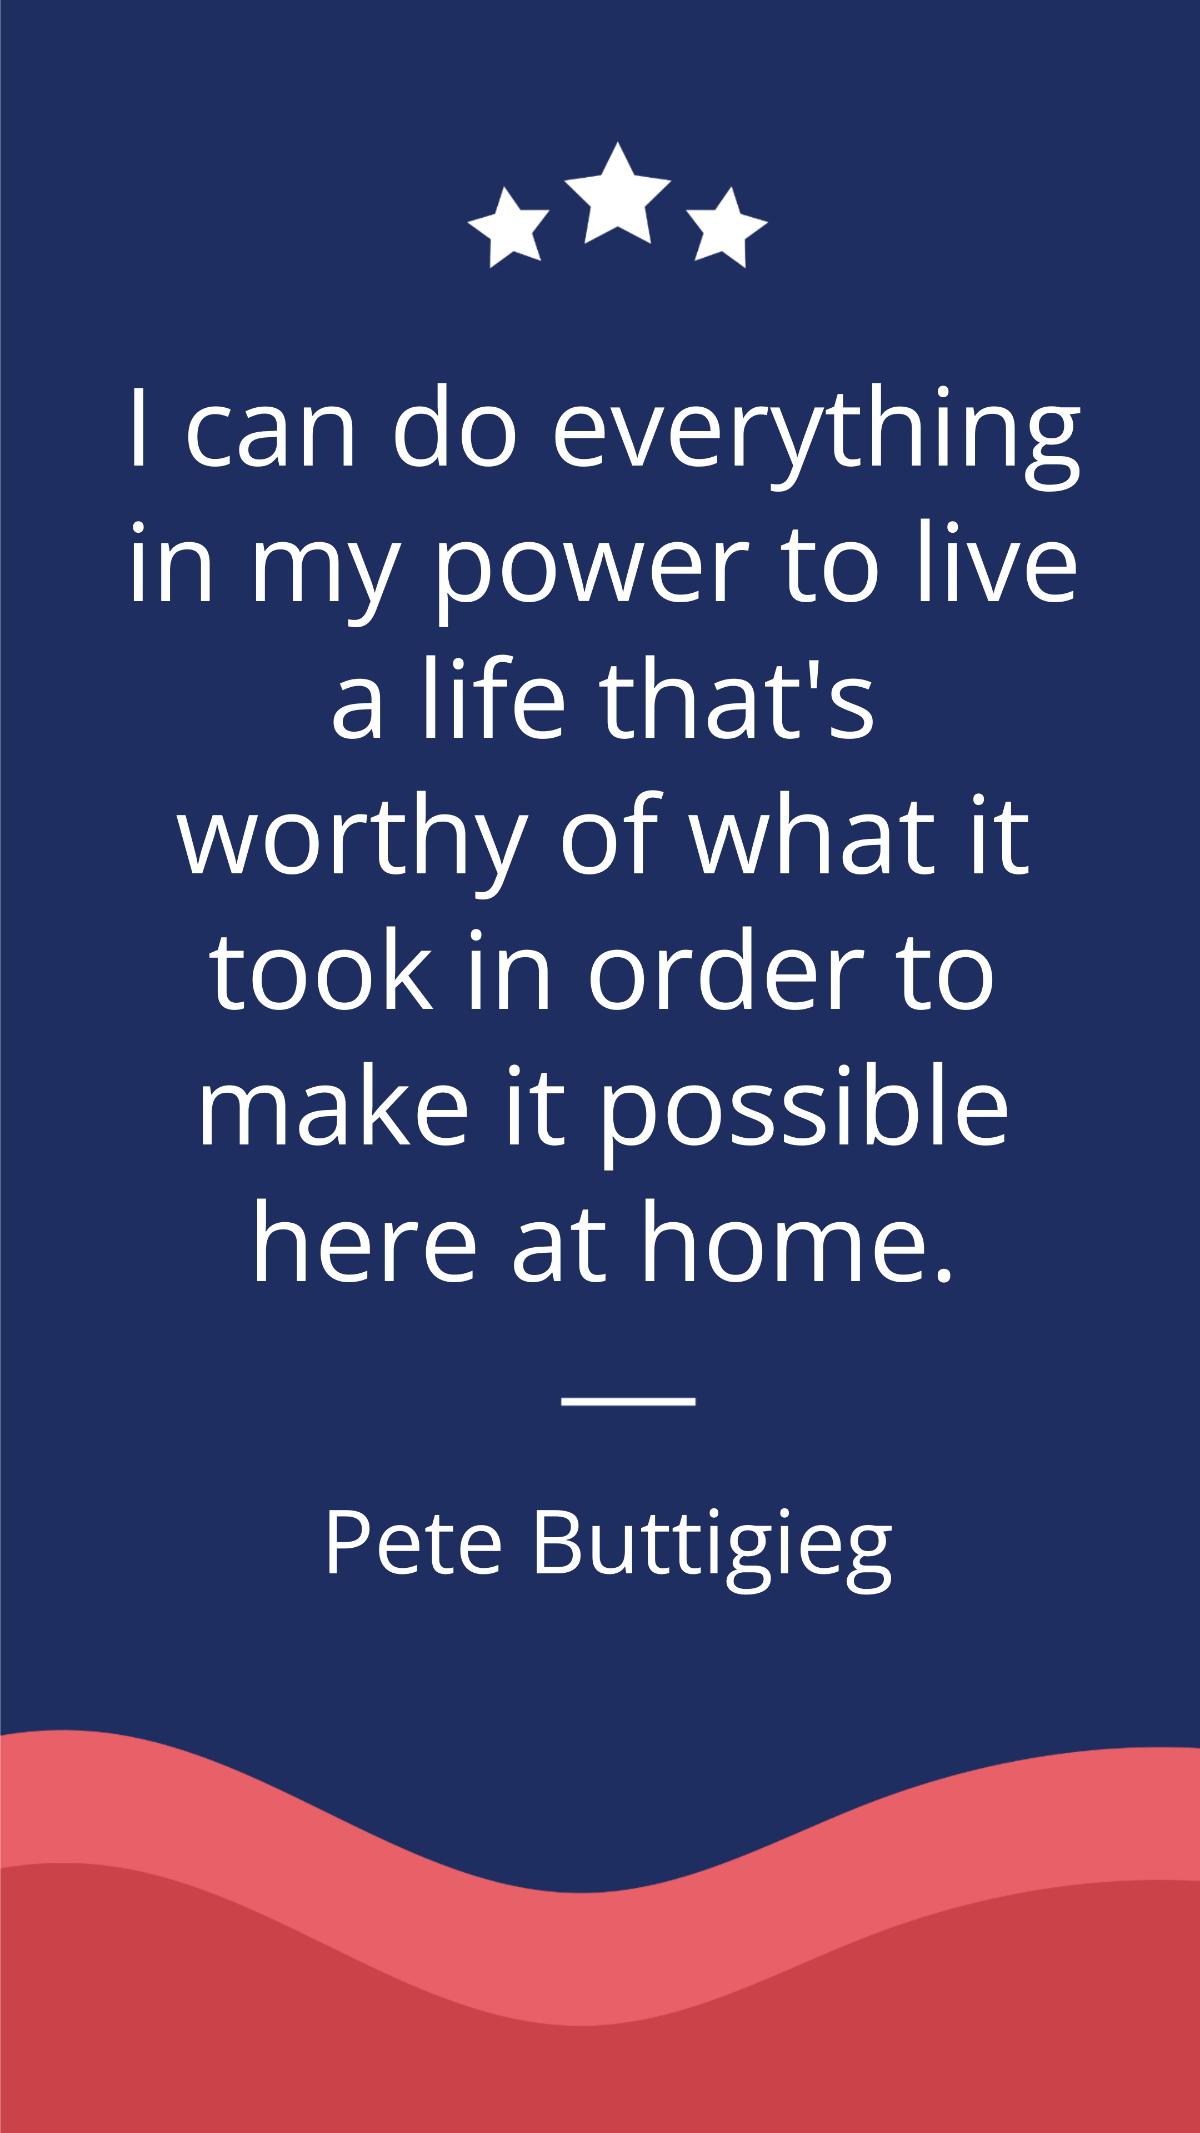 Pete Buttigieg - I can do everything in my power to live a life that's worthy of what it took in order to make it possible to be here at home. Template